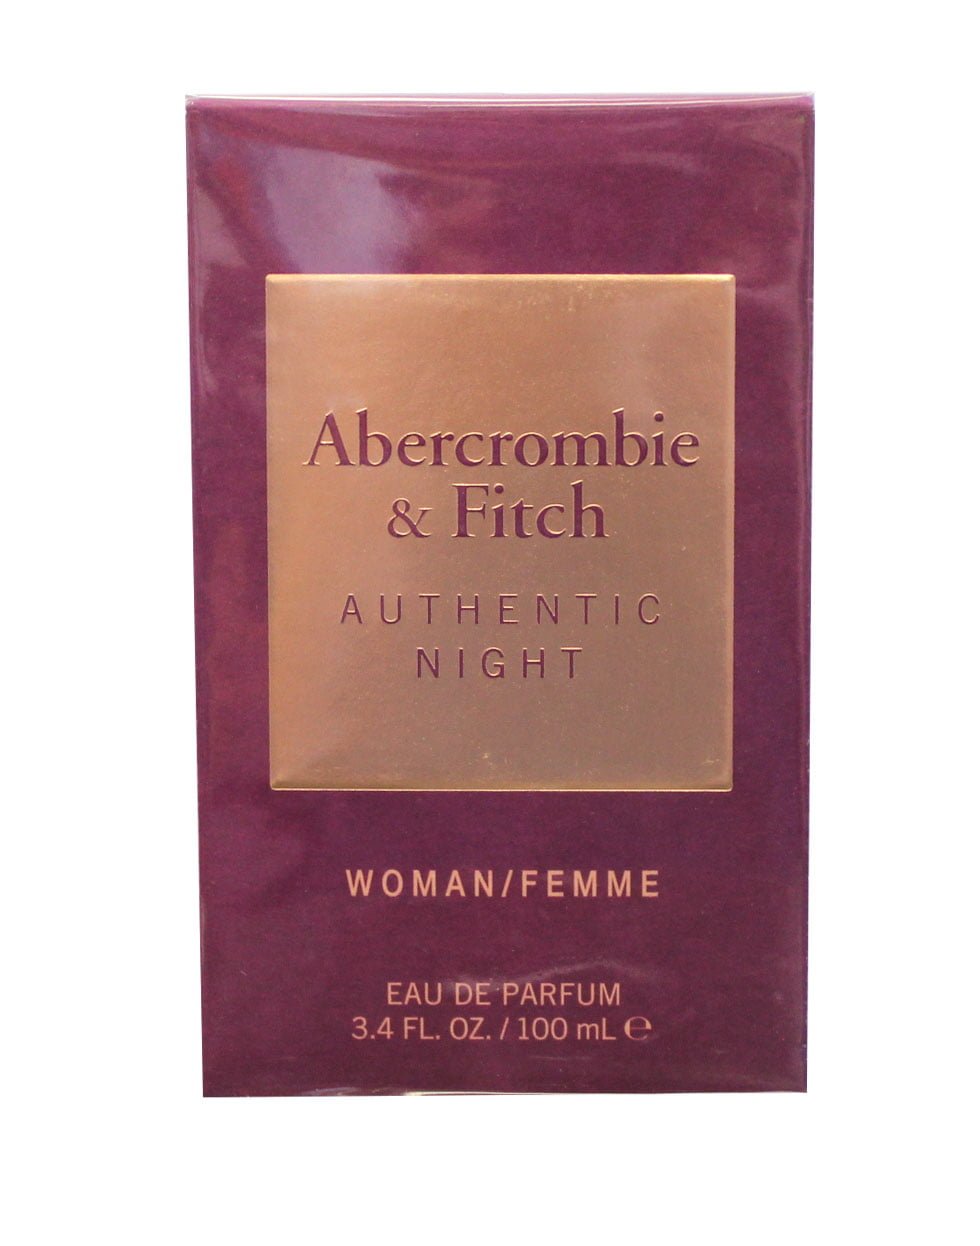 Abercrombie & Fitch Authentic Night EDP For Women | My Perfume Shop Australia